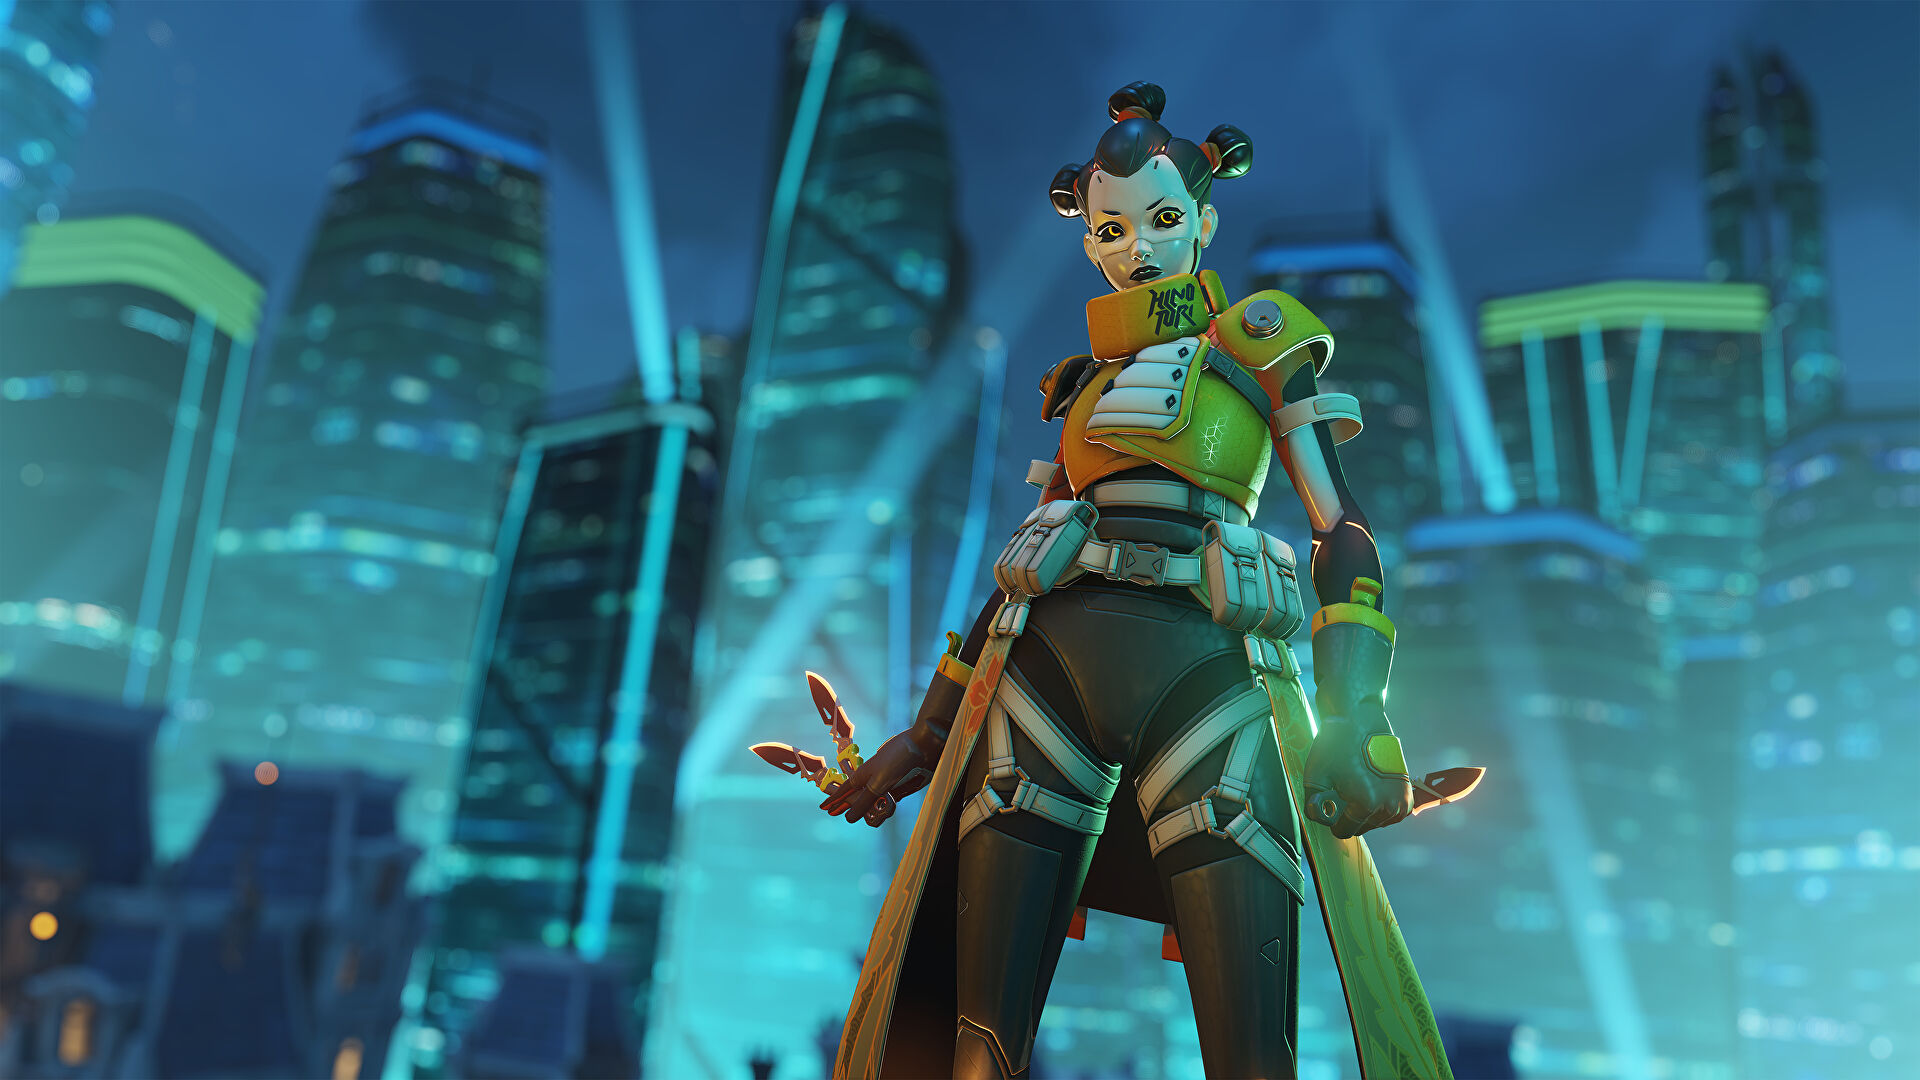 Overwatch 2 attracted over 25 million players within 10 days of release